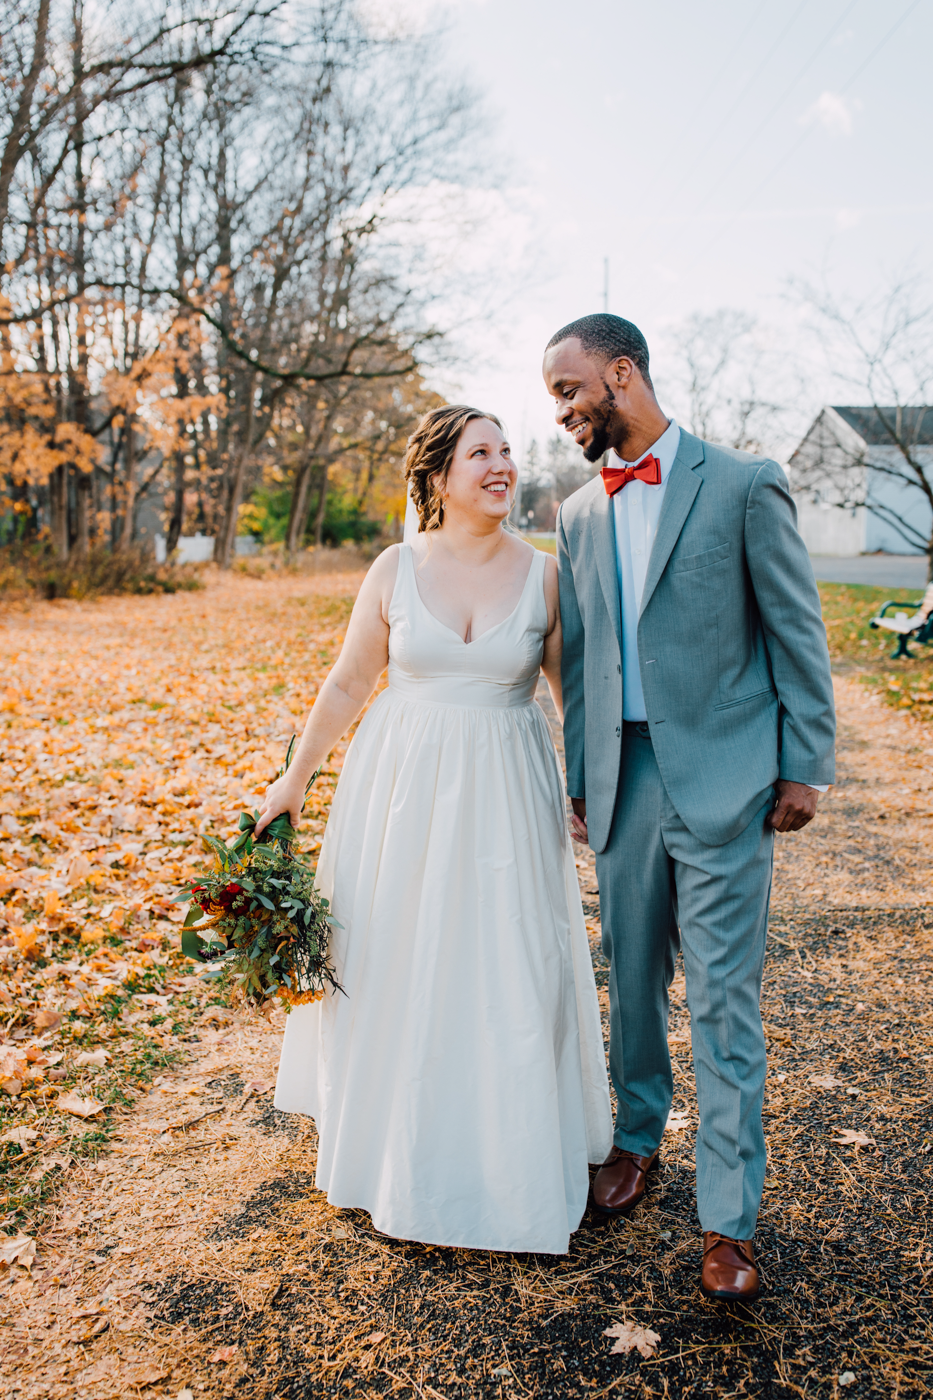  Bride and Groom walk together holding hands during their fall wedding in Central NY 